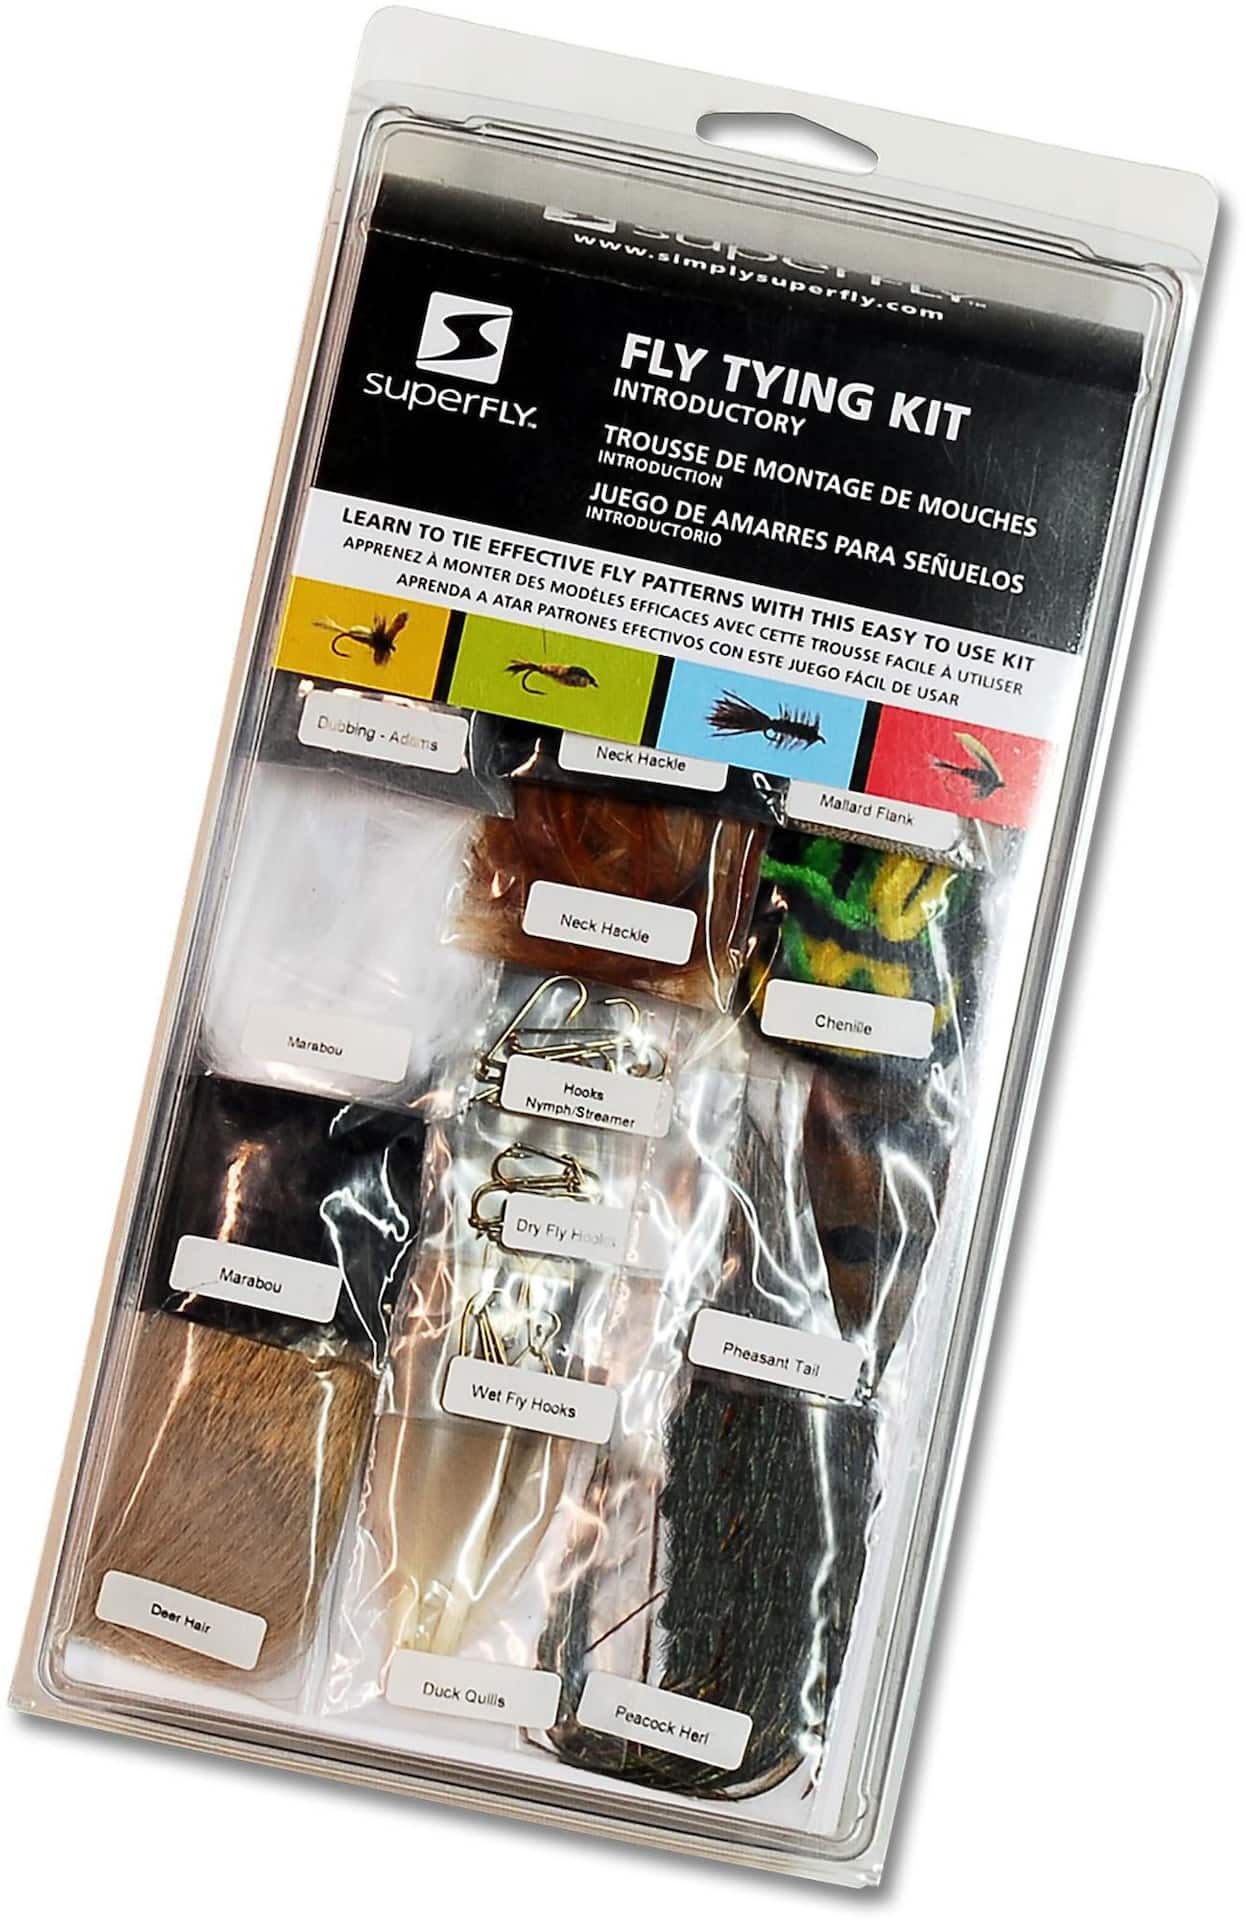 https://media-www.canadiantire.ca/product/playing/fishing/fishing-lures/0788587/super-fly-fly-tying-kit-novice-db61c5dd-fa57-4142-a4f2-ea28f5e1cc9f-jpgrendition.jpg